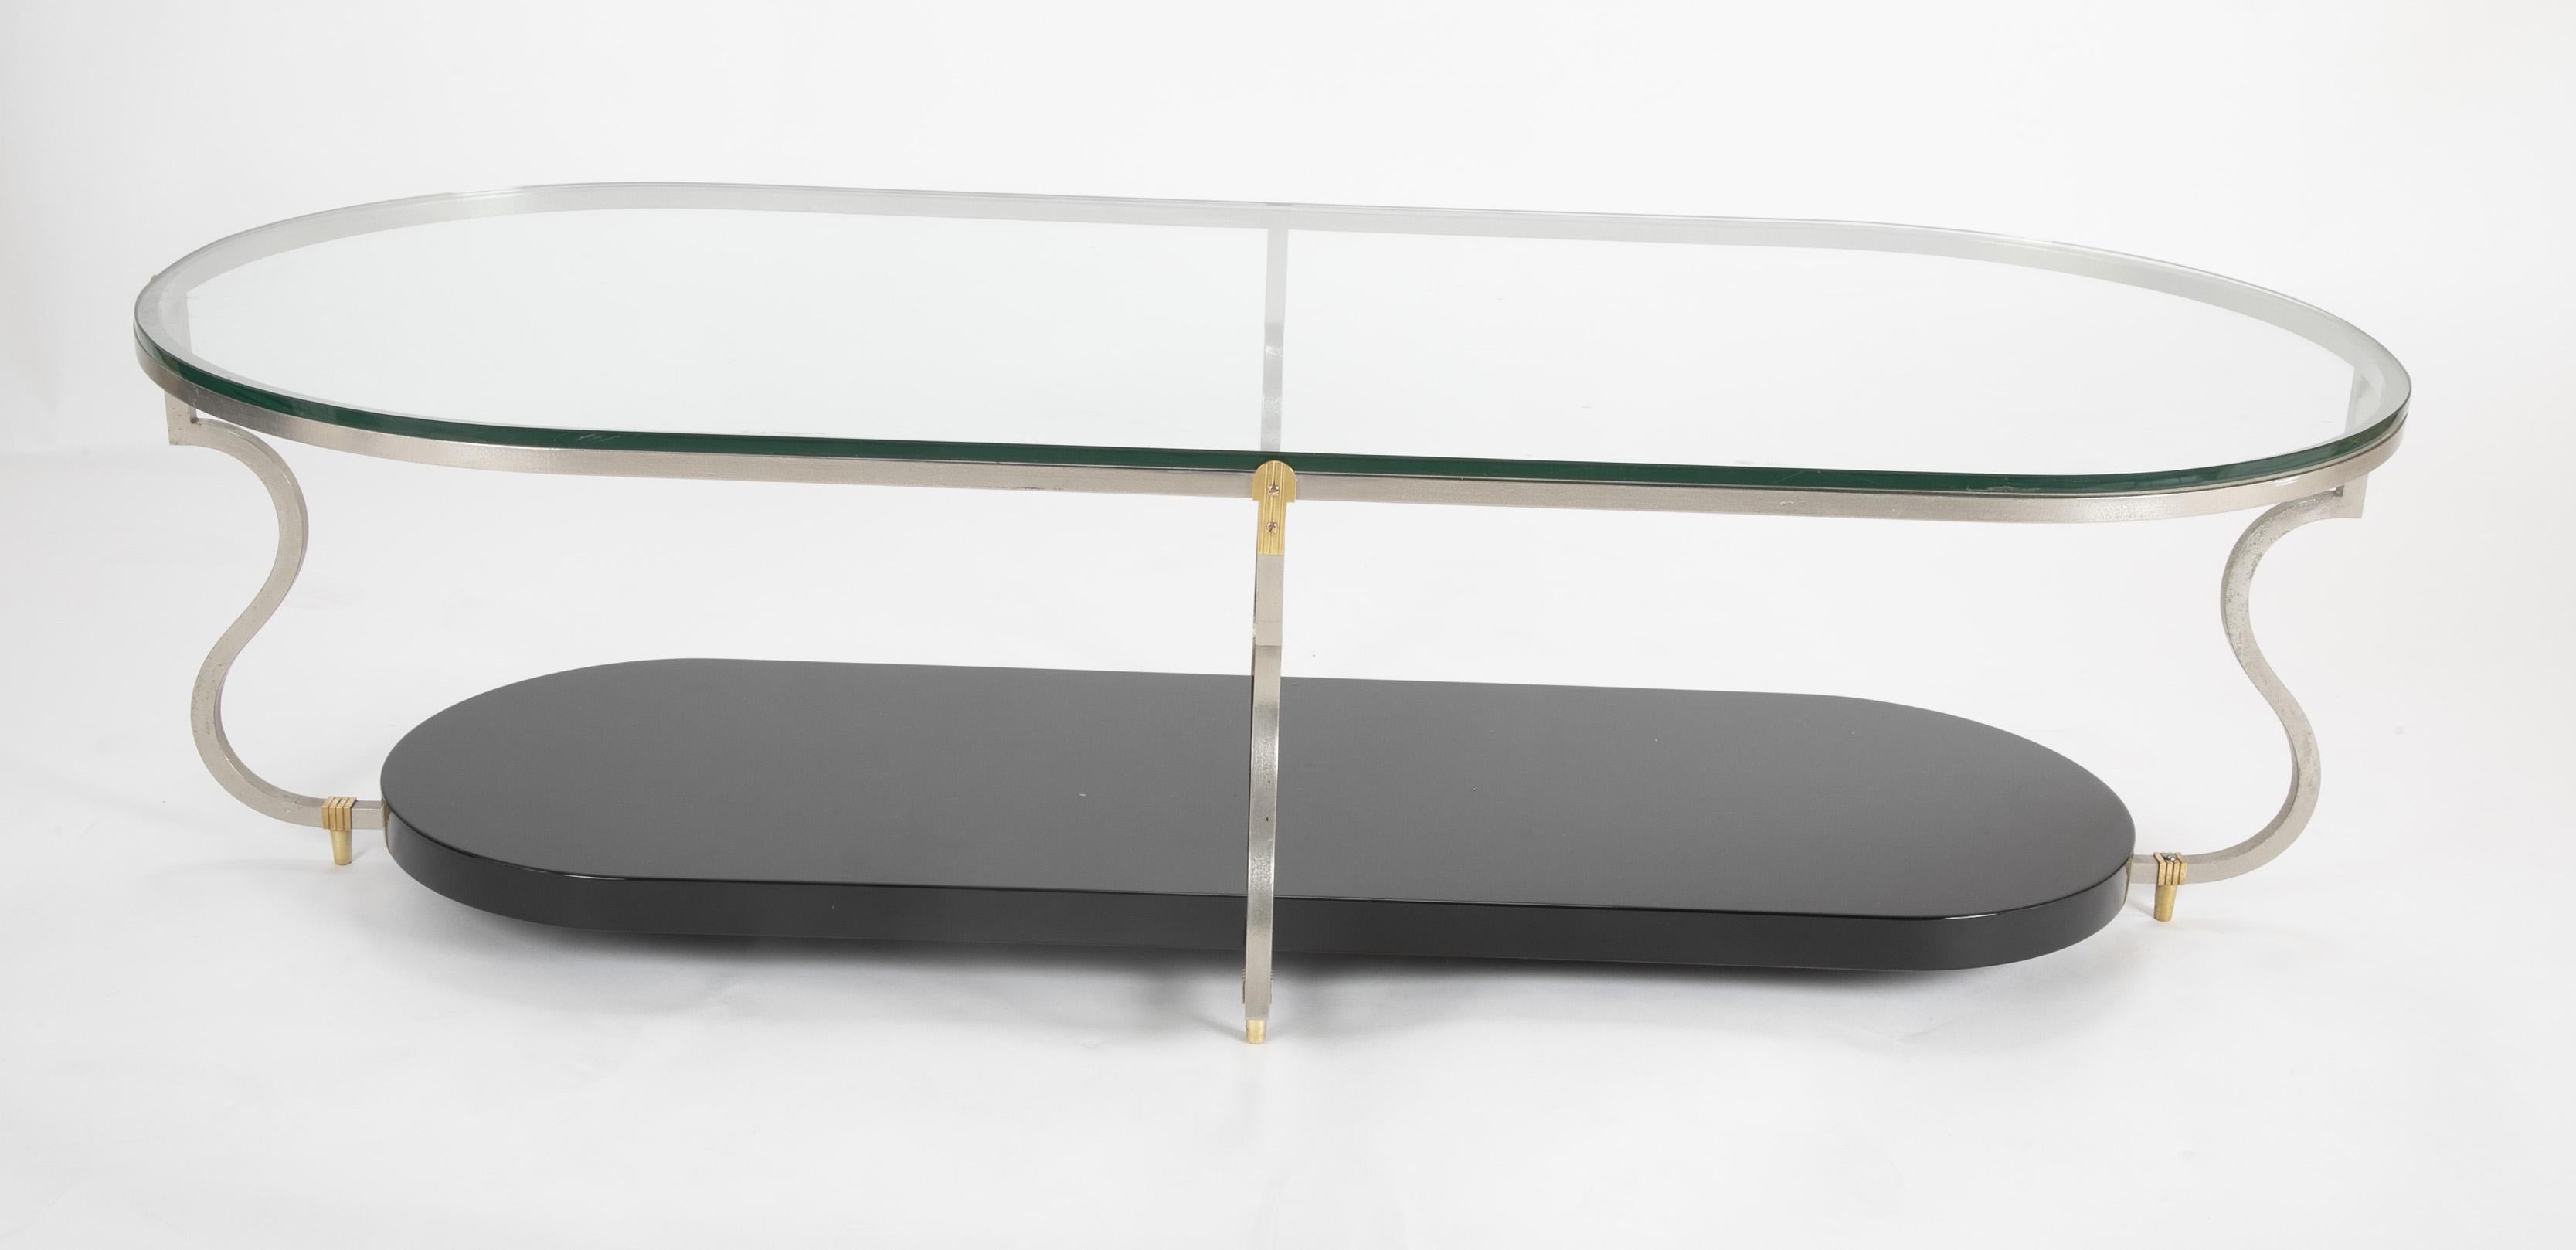 Mid-20th Century Coffee Table Designed by Tommi Parzinger for Parzinger Originals